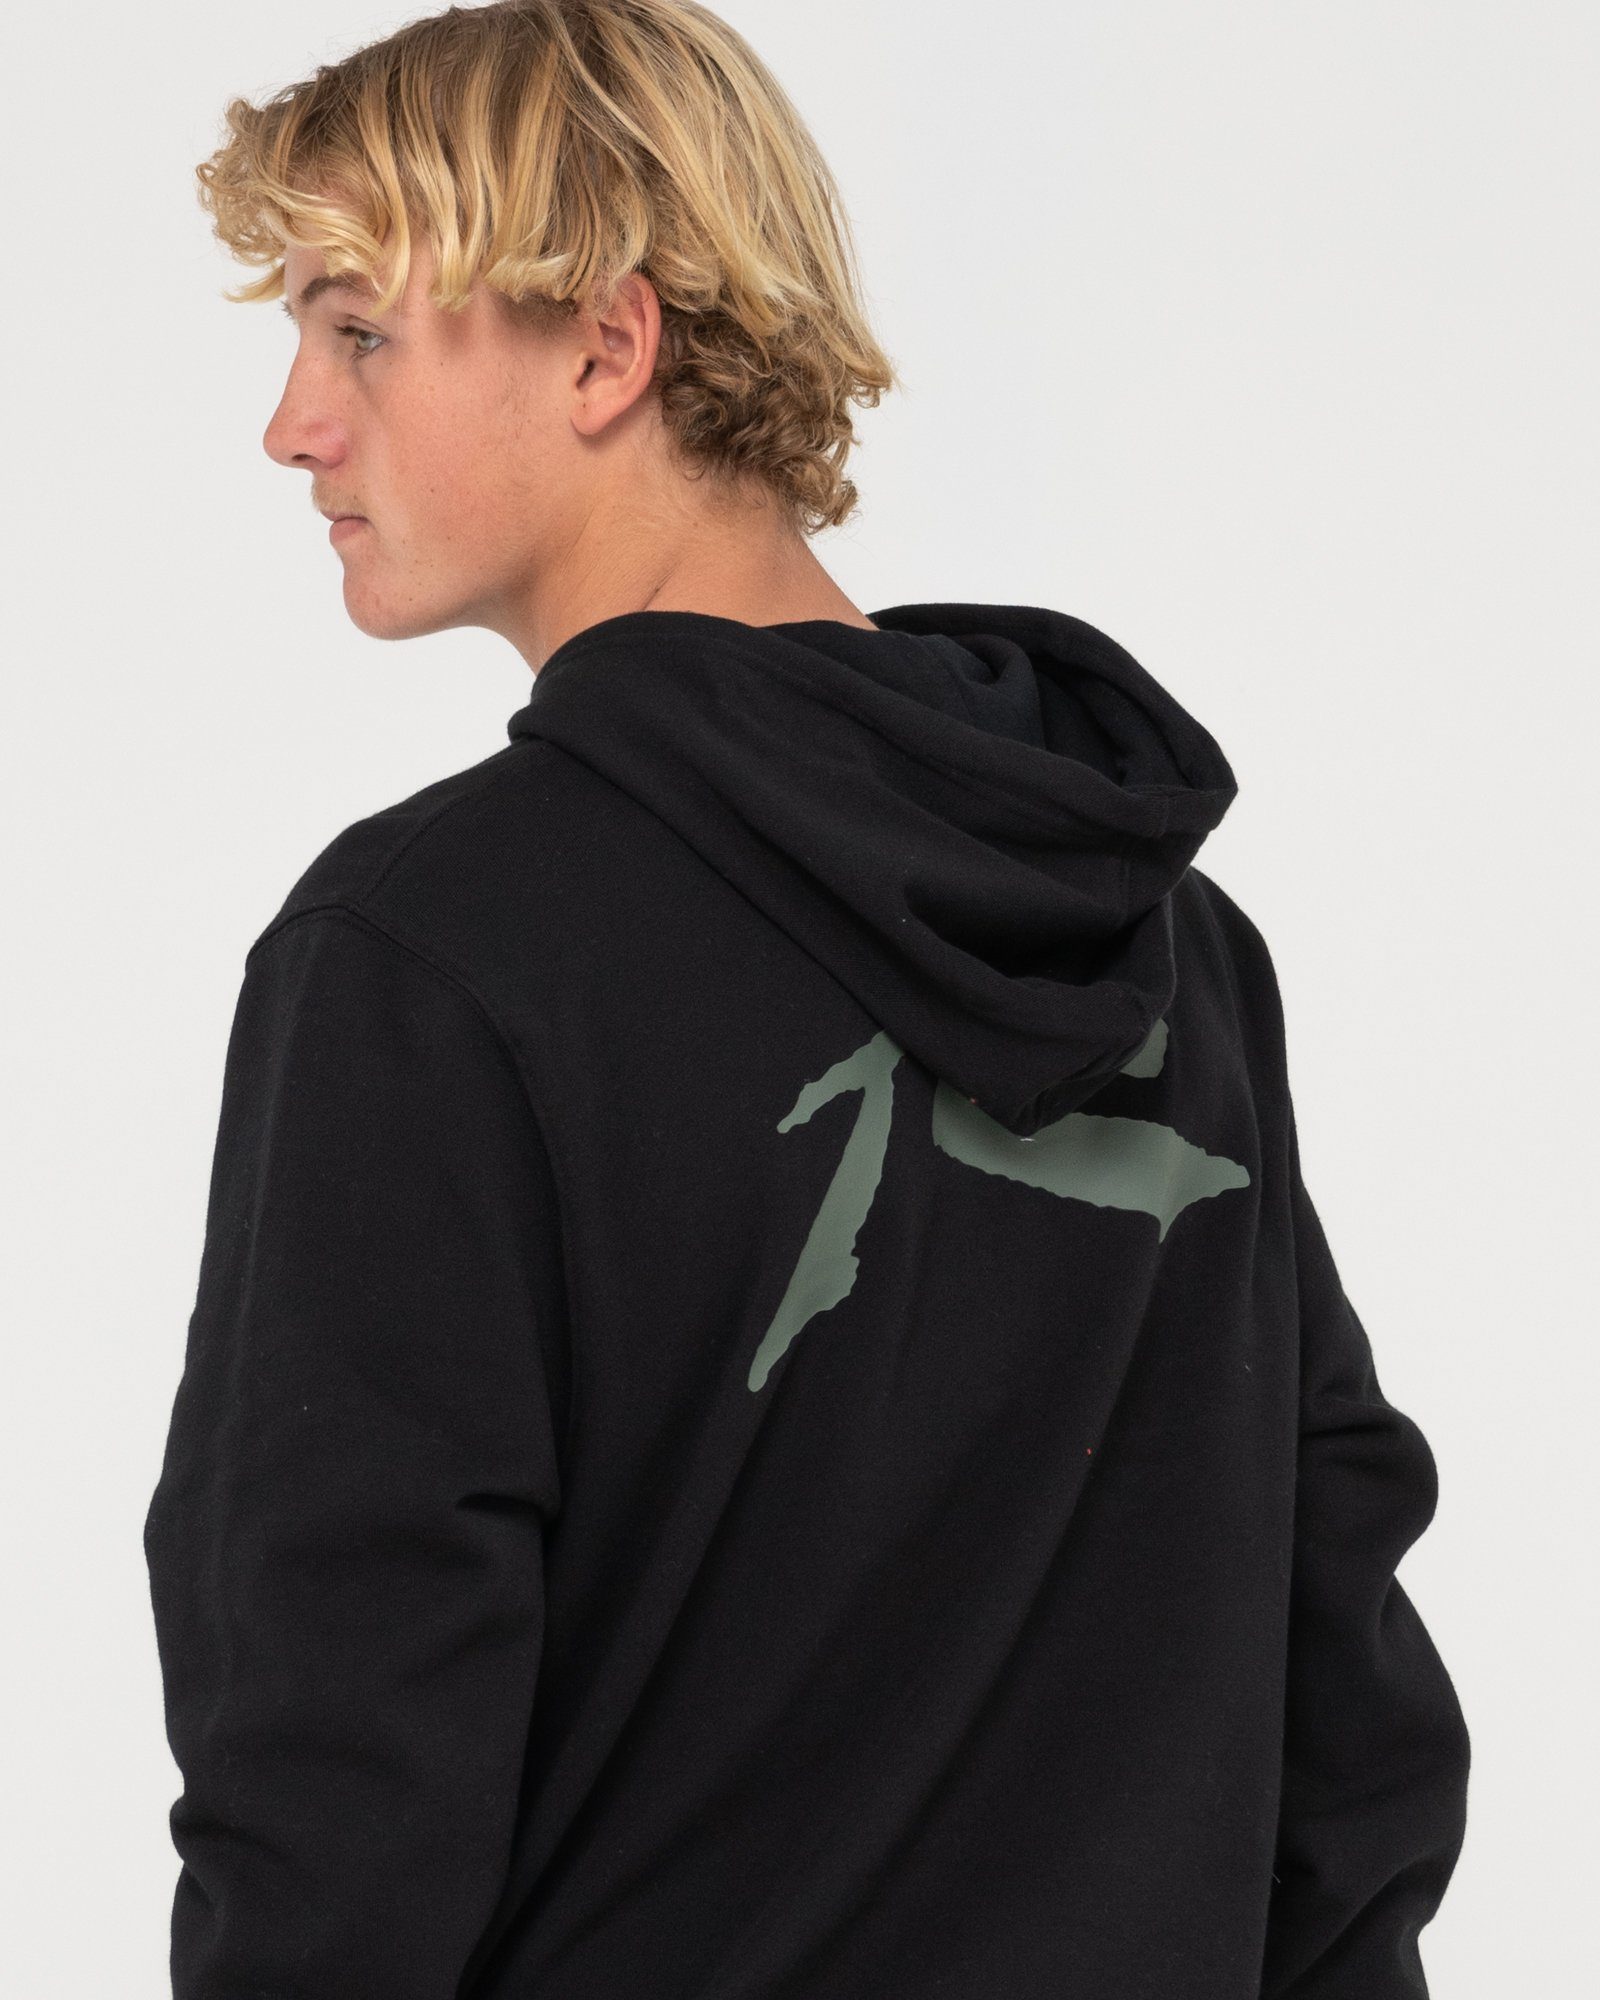 Rusty COMPETITION Black/Shadow HOODED Army Hoodie FLEECE